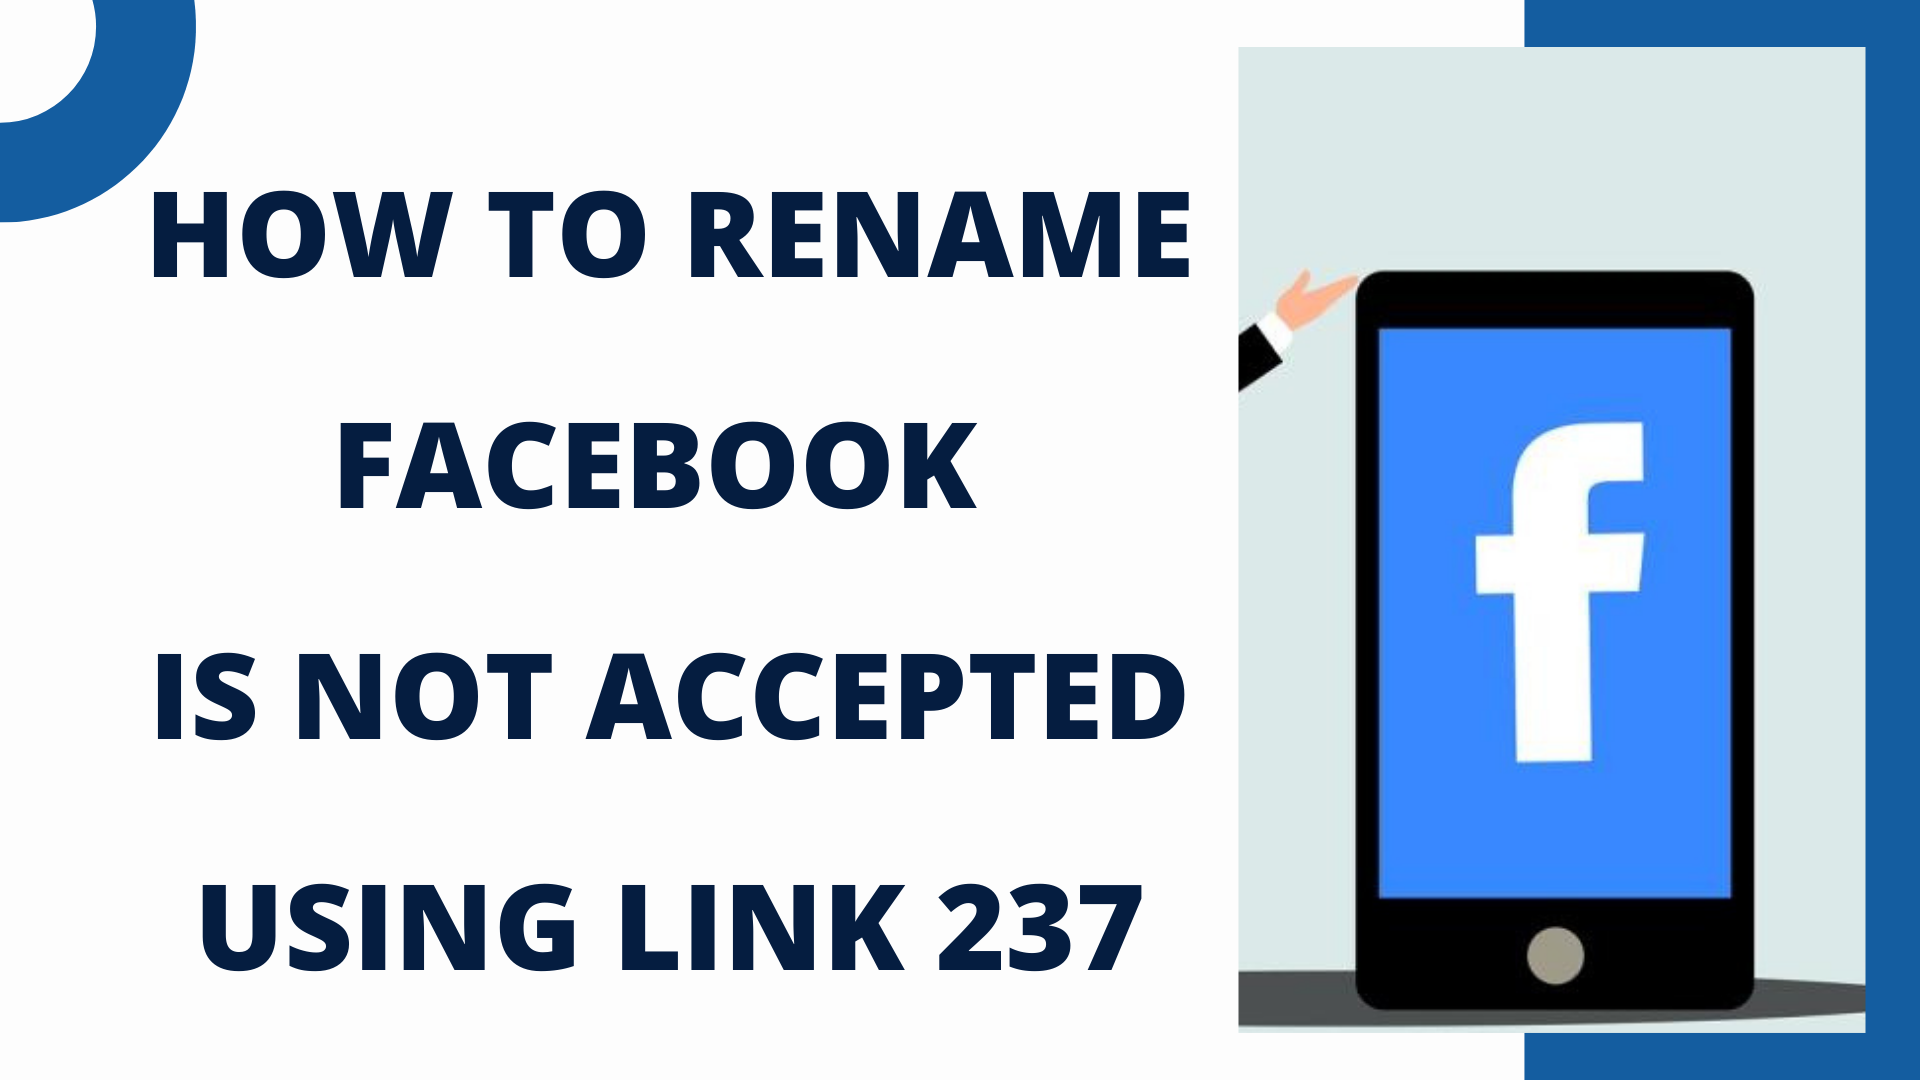 How to rename Facebook is not accepted using Link 237